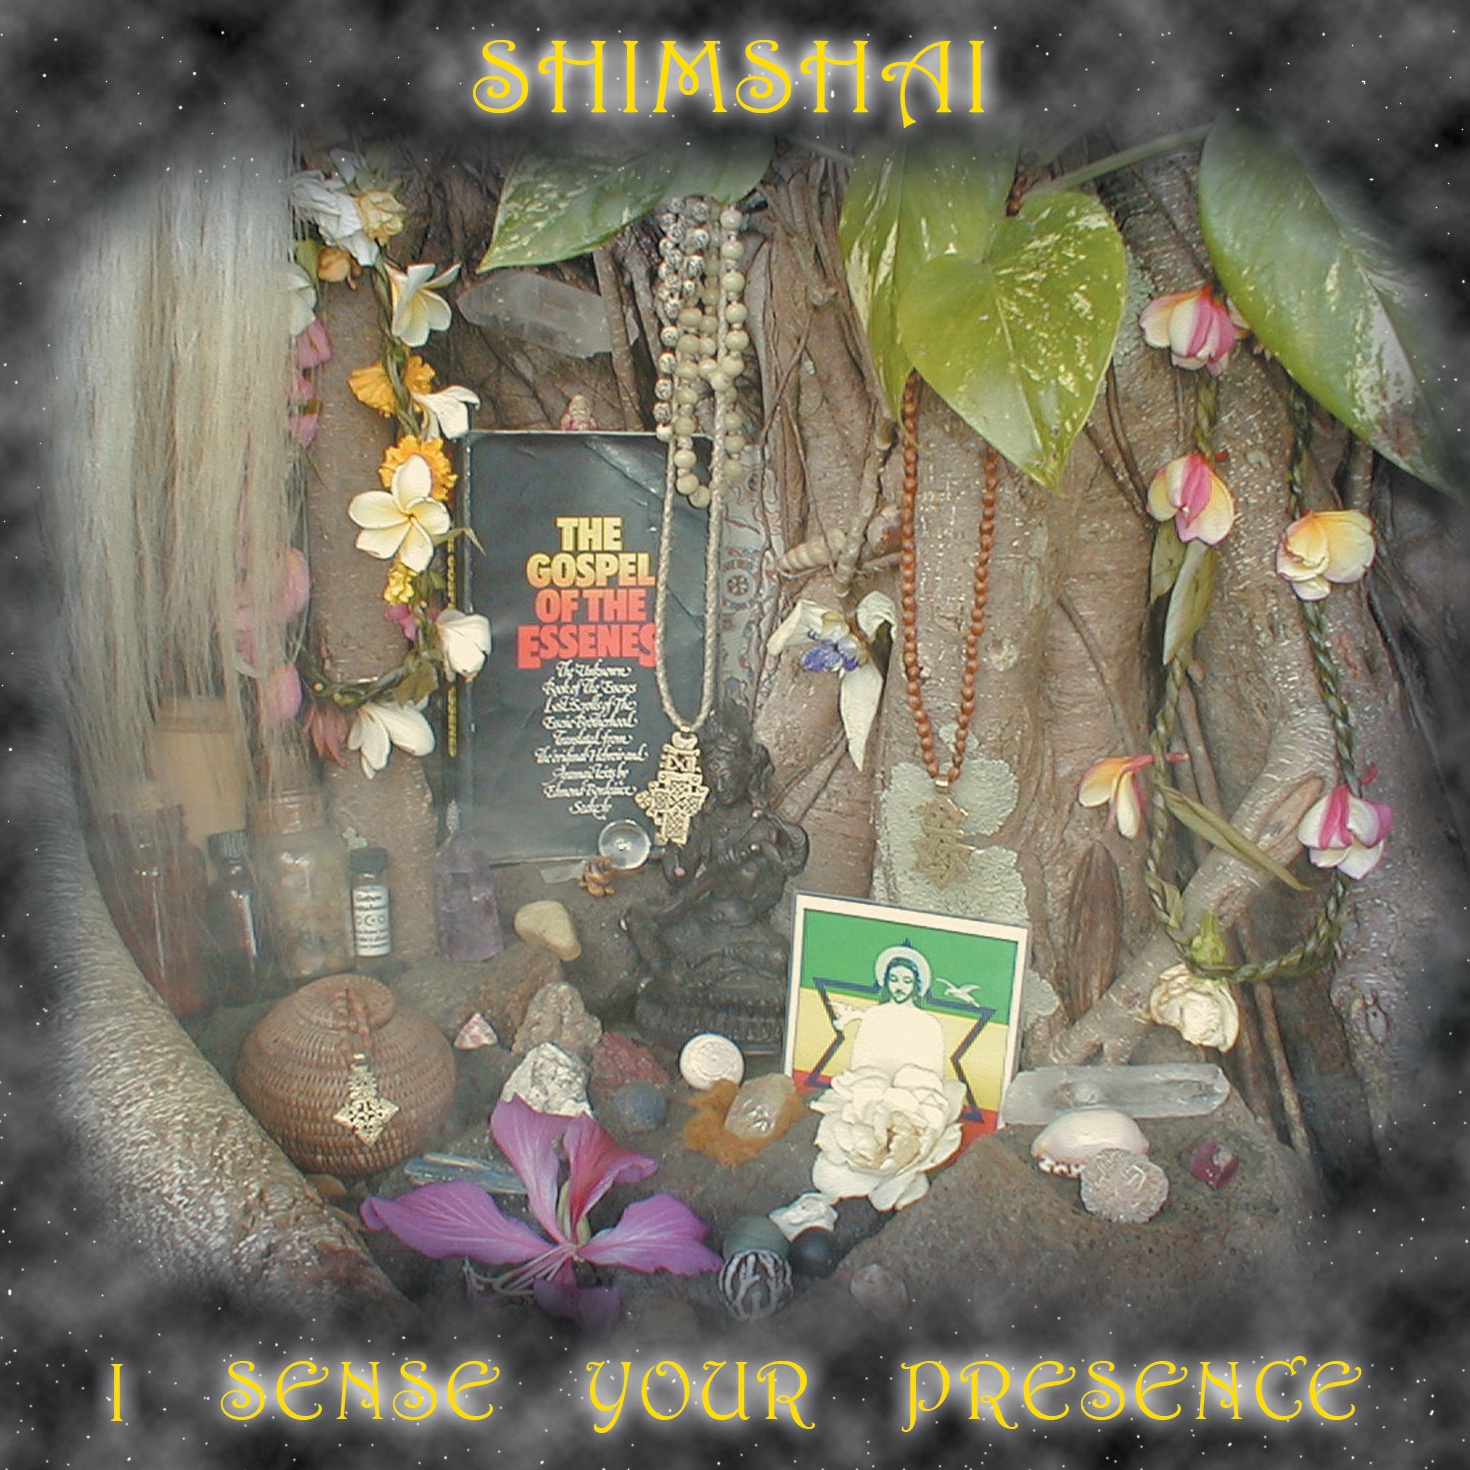 Roots by Shimshai from the album I Sense Your Presence, original roots reggae music with a deep spiritual message